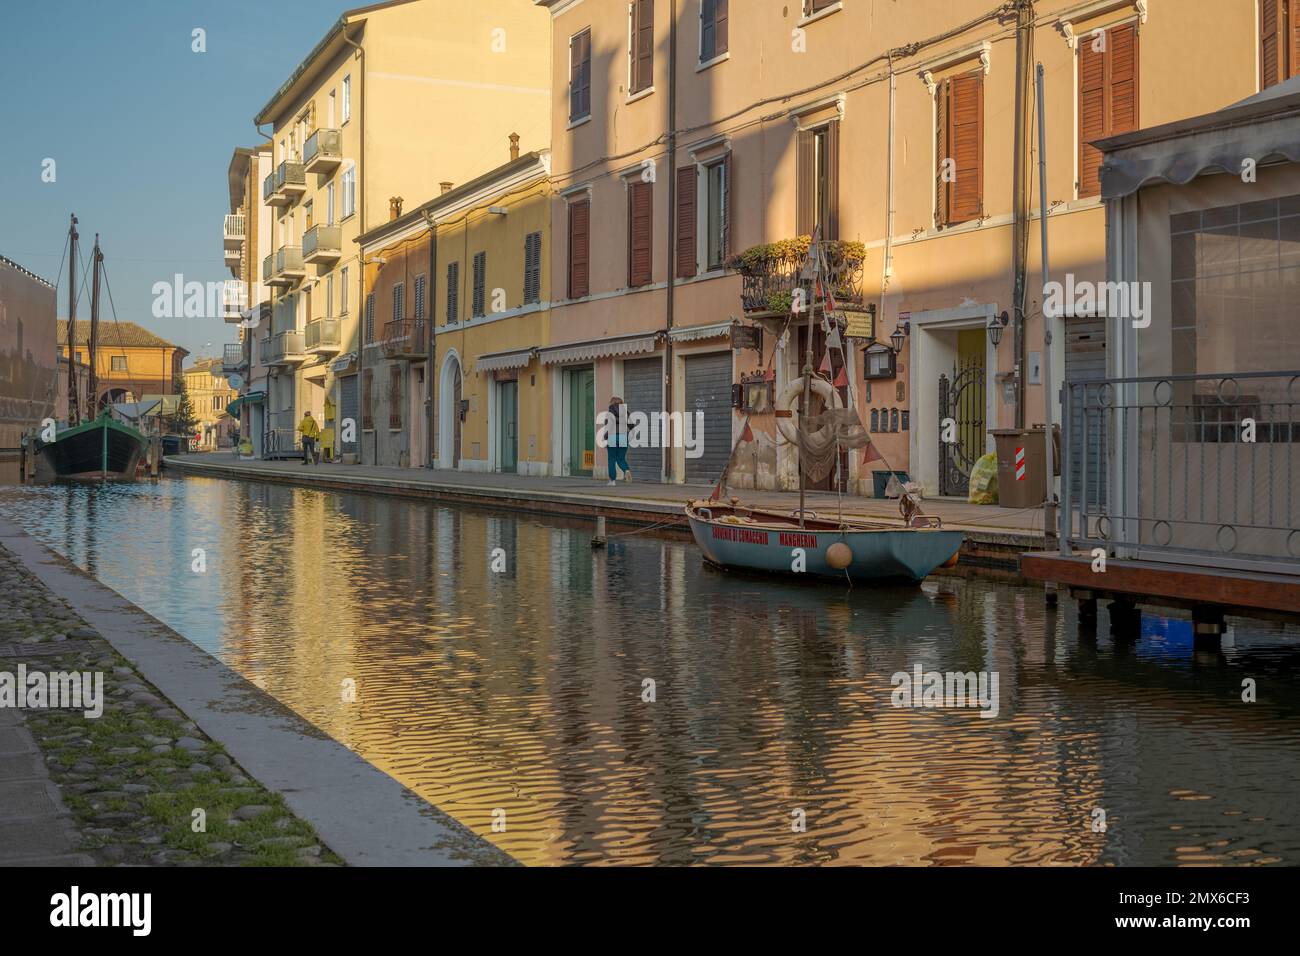 Main street and waterway of the city of Comacchio in a winter afternoon; Comacchio, province of Ferrara, Emilia Romagna, Italy. Stock Photo